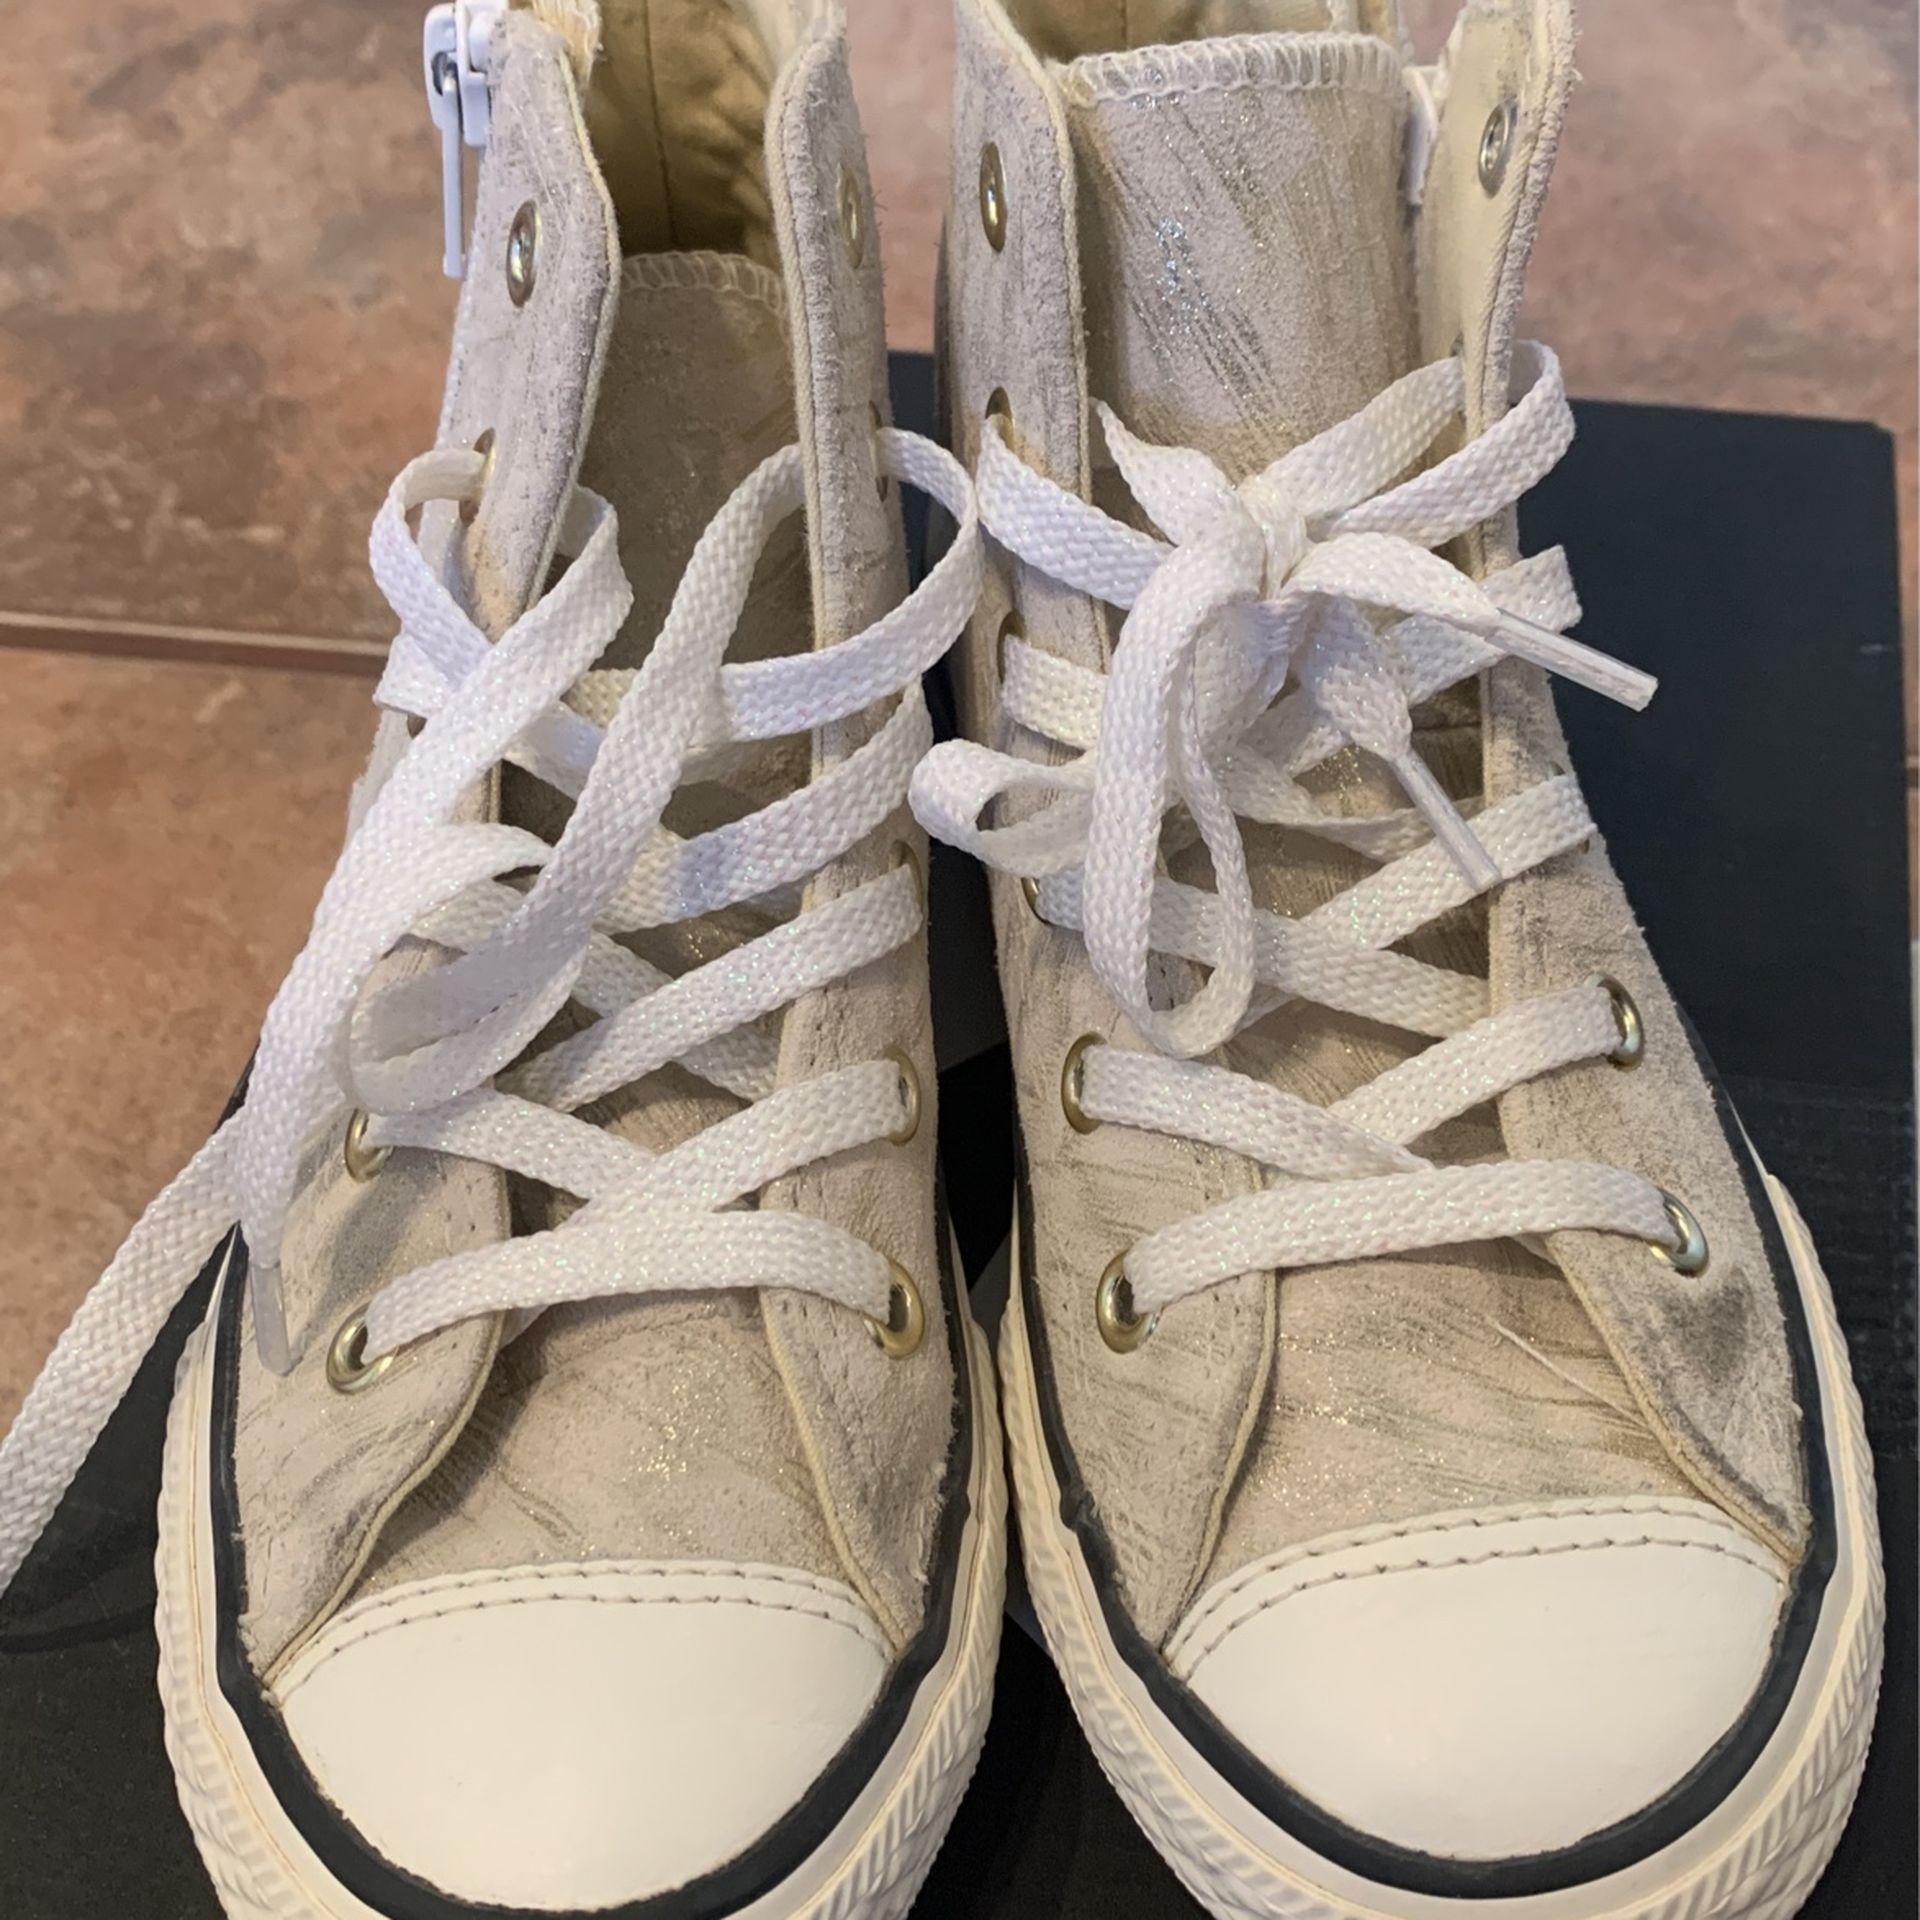 Girls Converse Shoes Size 13 High Top